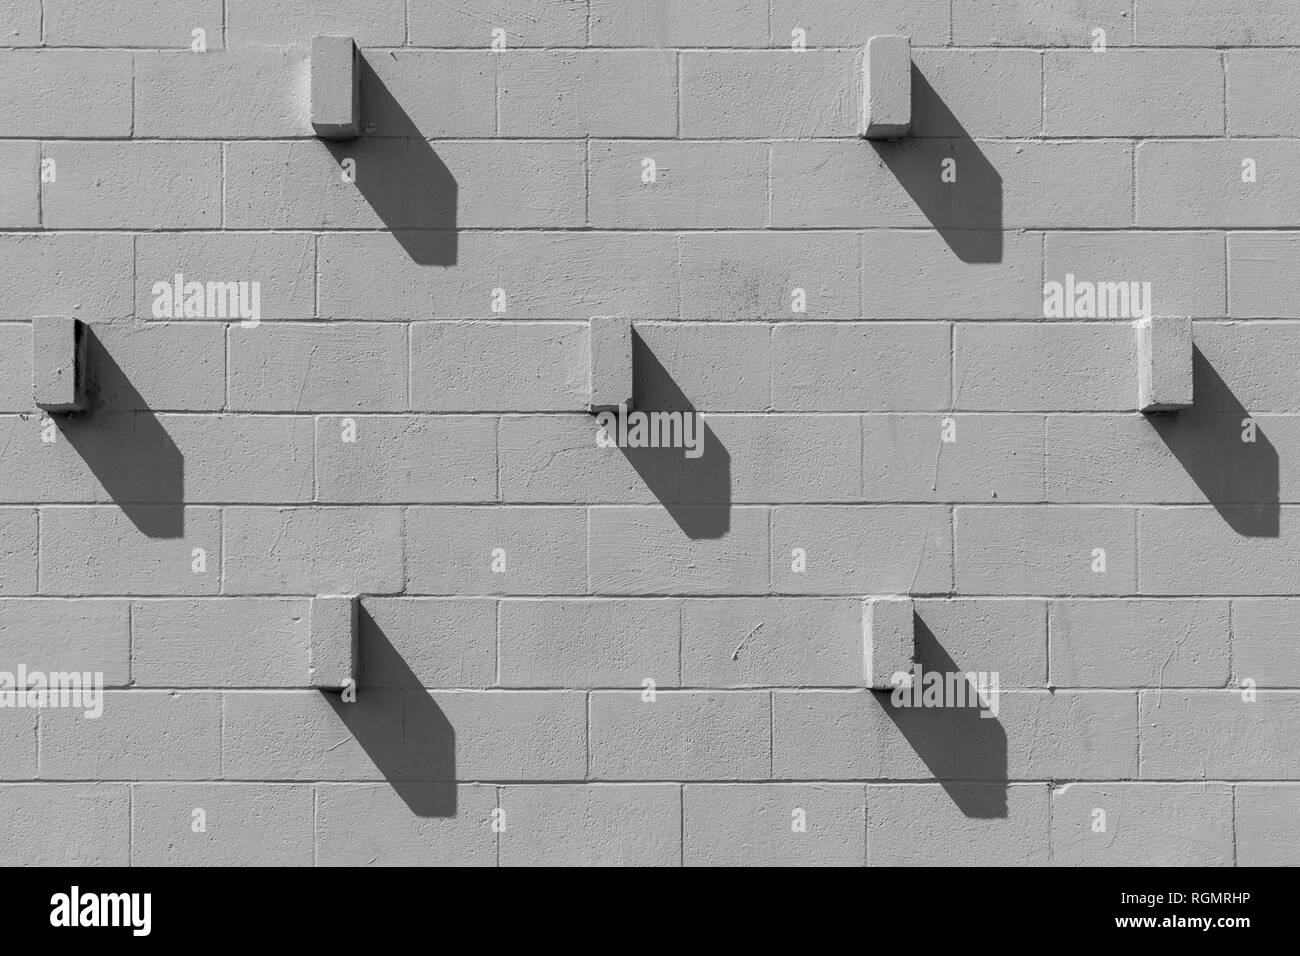 Bricks that are protruding from a cinder block wall are casting diagonal shadows. The scene looks similar to the face of a clock. Stock Photo